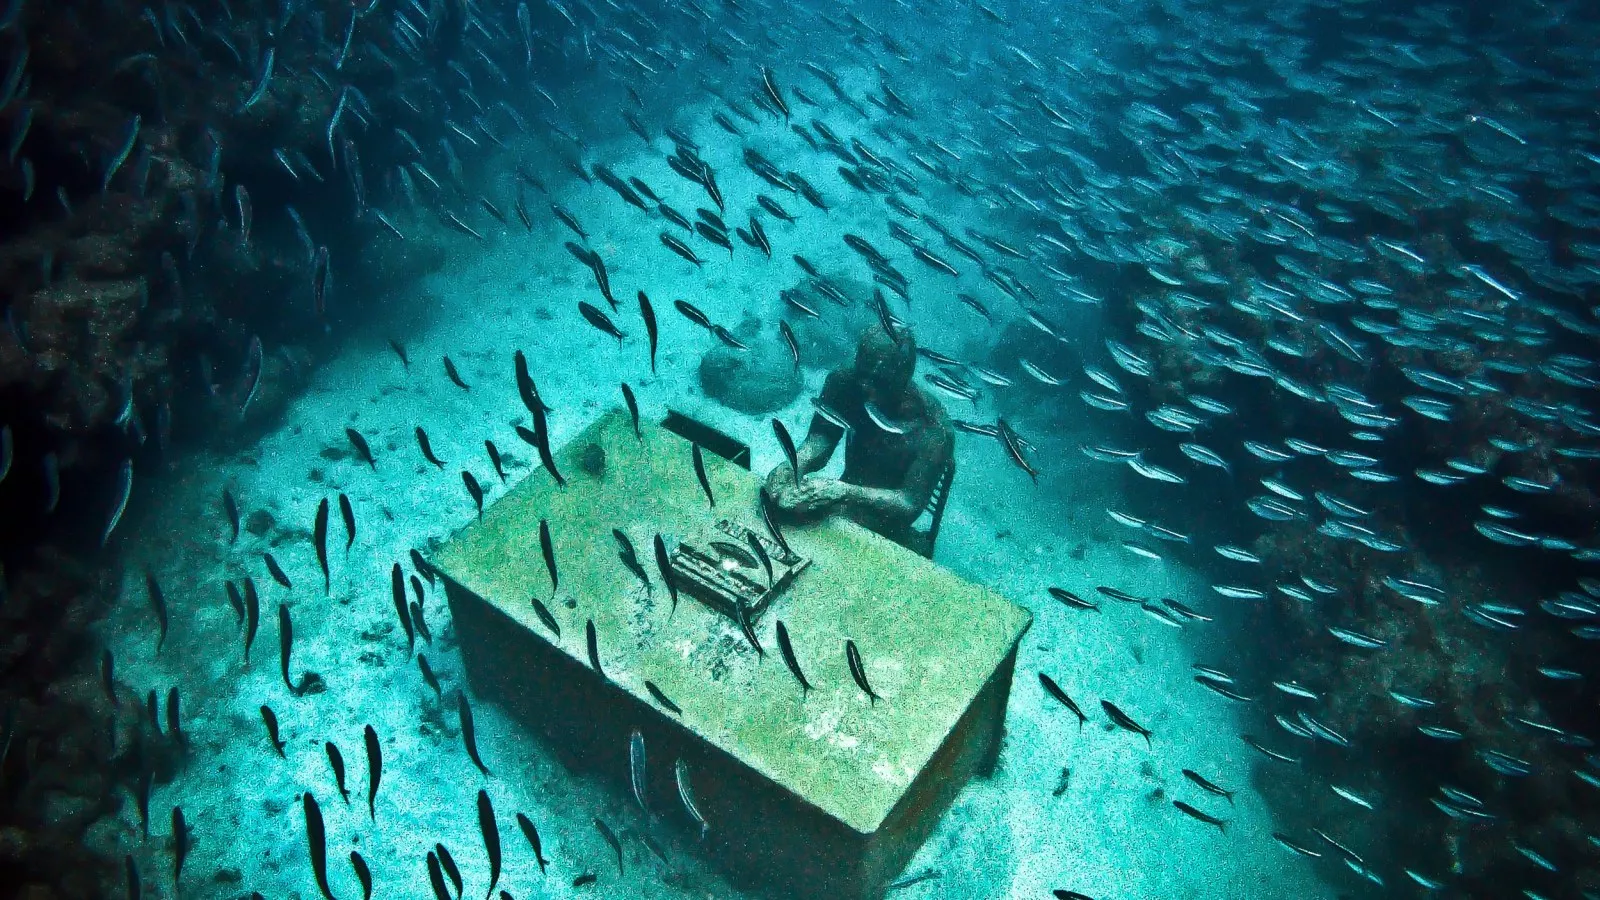 Underwater Art Worth Traveling For: A Look at Our 7 Favorite